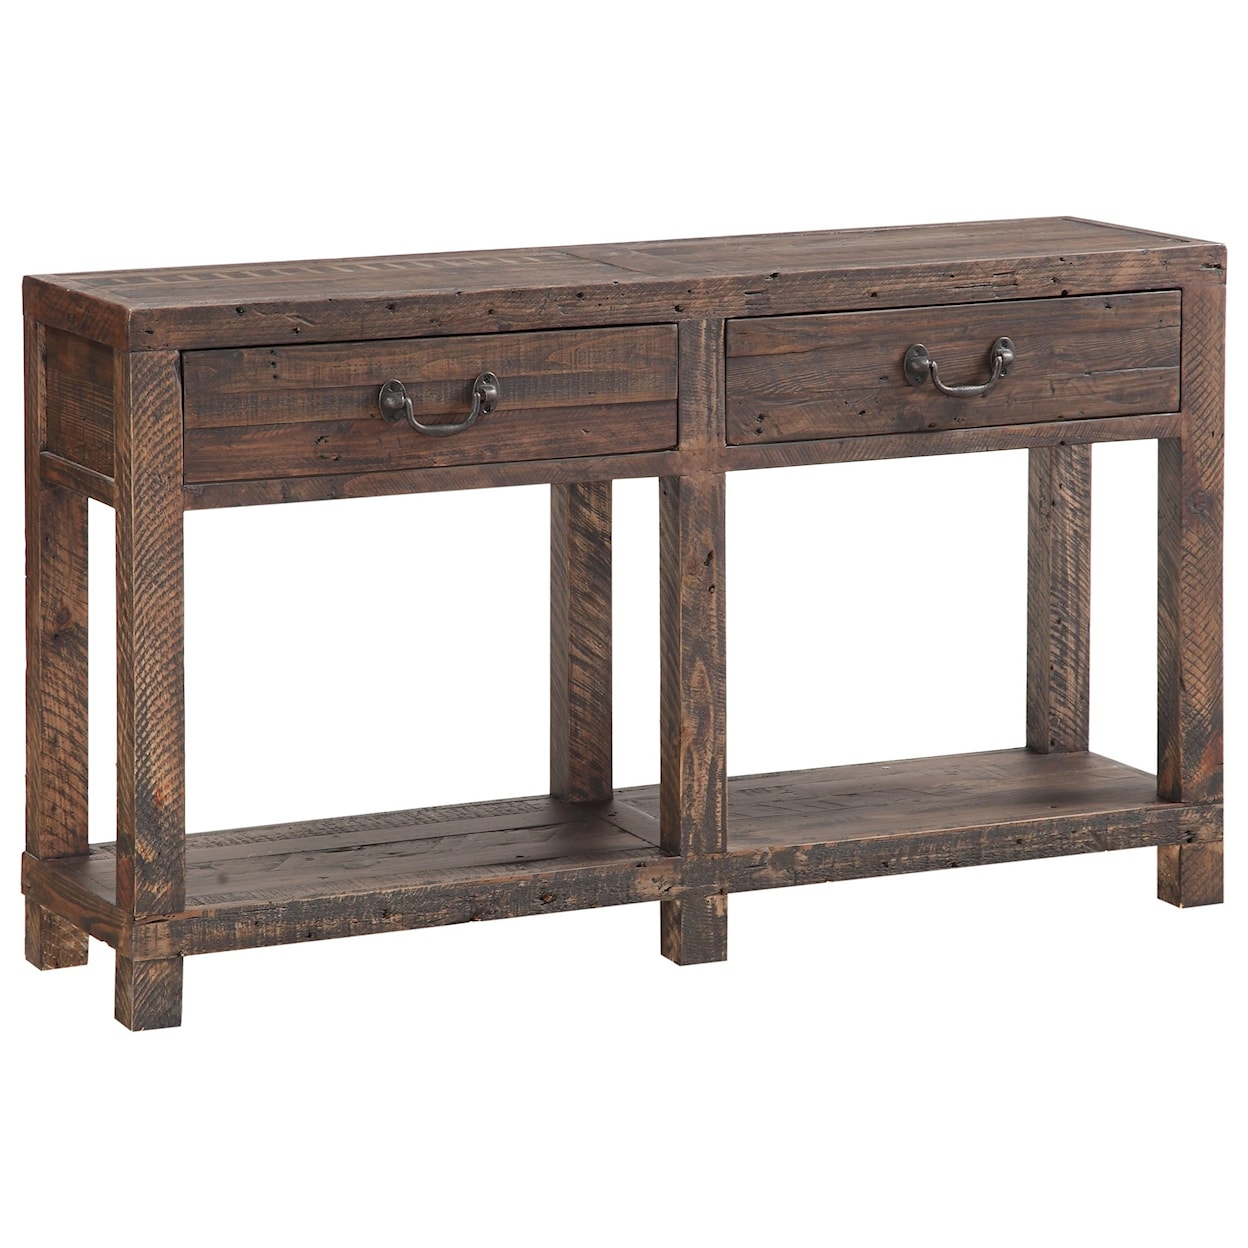 Modus International Craster   Reclaimed Wood Console Table